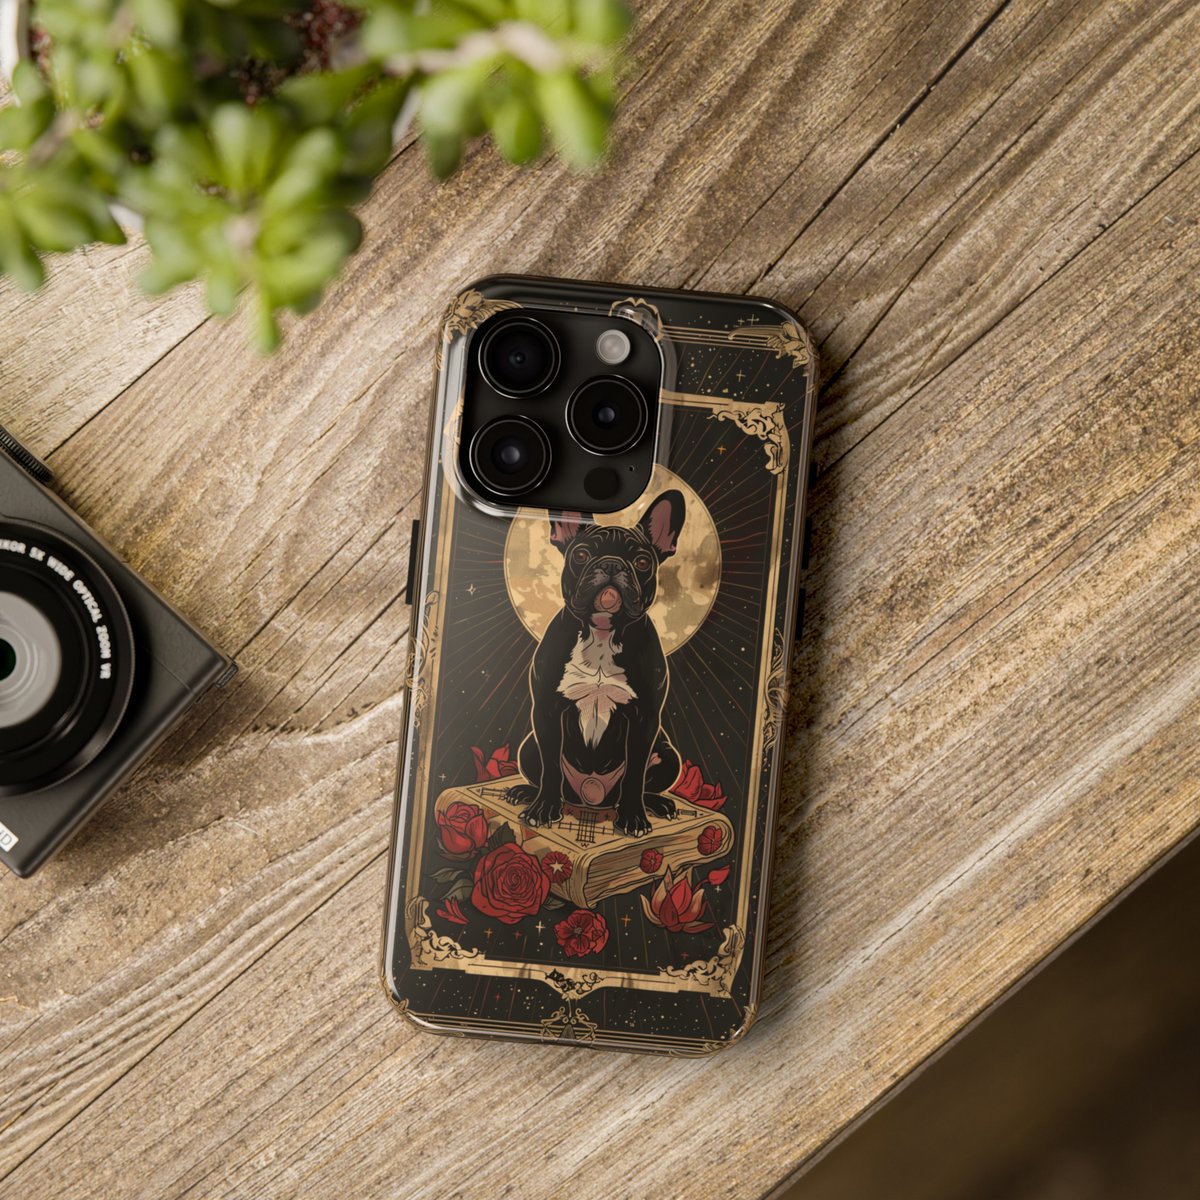 Tarot Card French Bulldog phone case for iPhone - Link in Bio!
#phonecase #iphonecase #aestheticphonecase
#gift #giftformom #giftfordad #giftforhim #giftforher
#tarot #tarotcards #frenchie #frenchieworld #frenchbulldog #frenchbulldoglife
#frenchbulldogpuppy #frenchbulldoglove